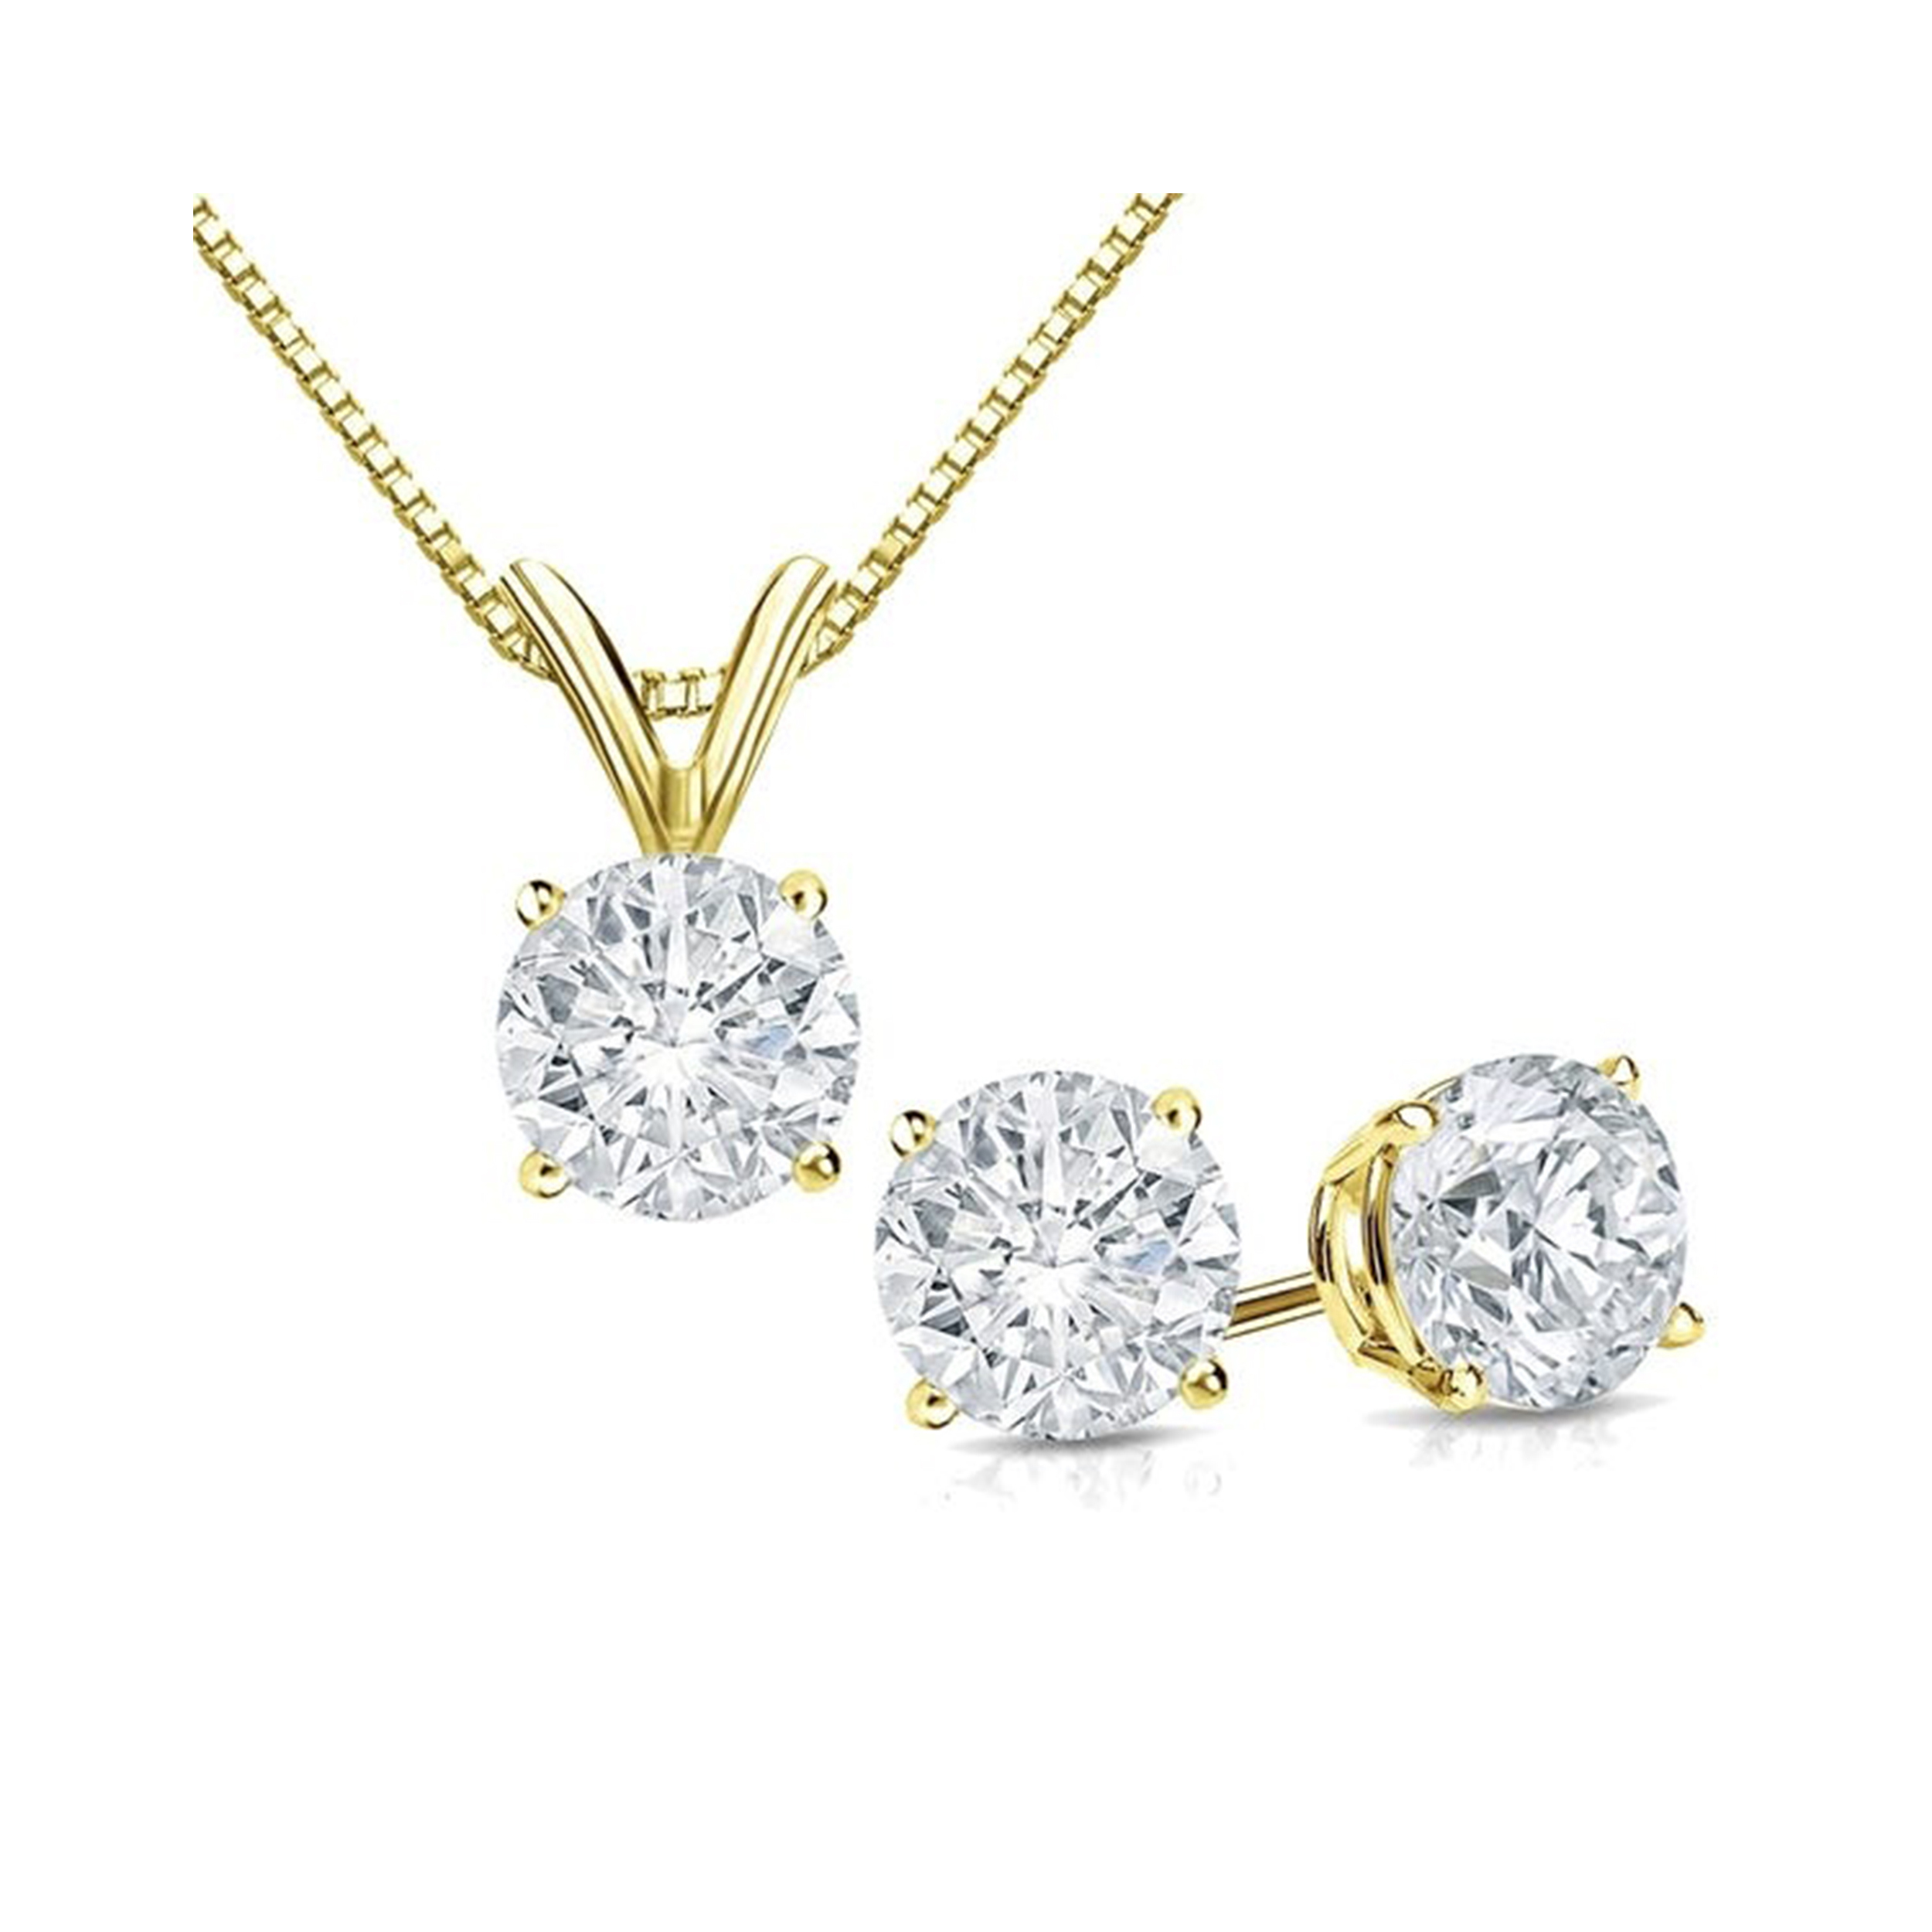 Bonjour Jewelers 1 Cttw Round White Sapphire 18 Inch Necklace In Earring Set 18k Gold Plated